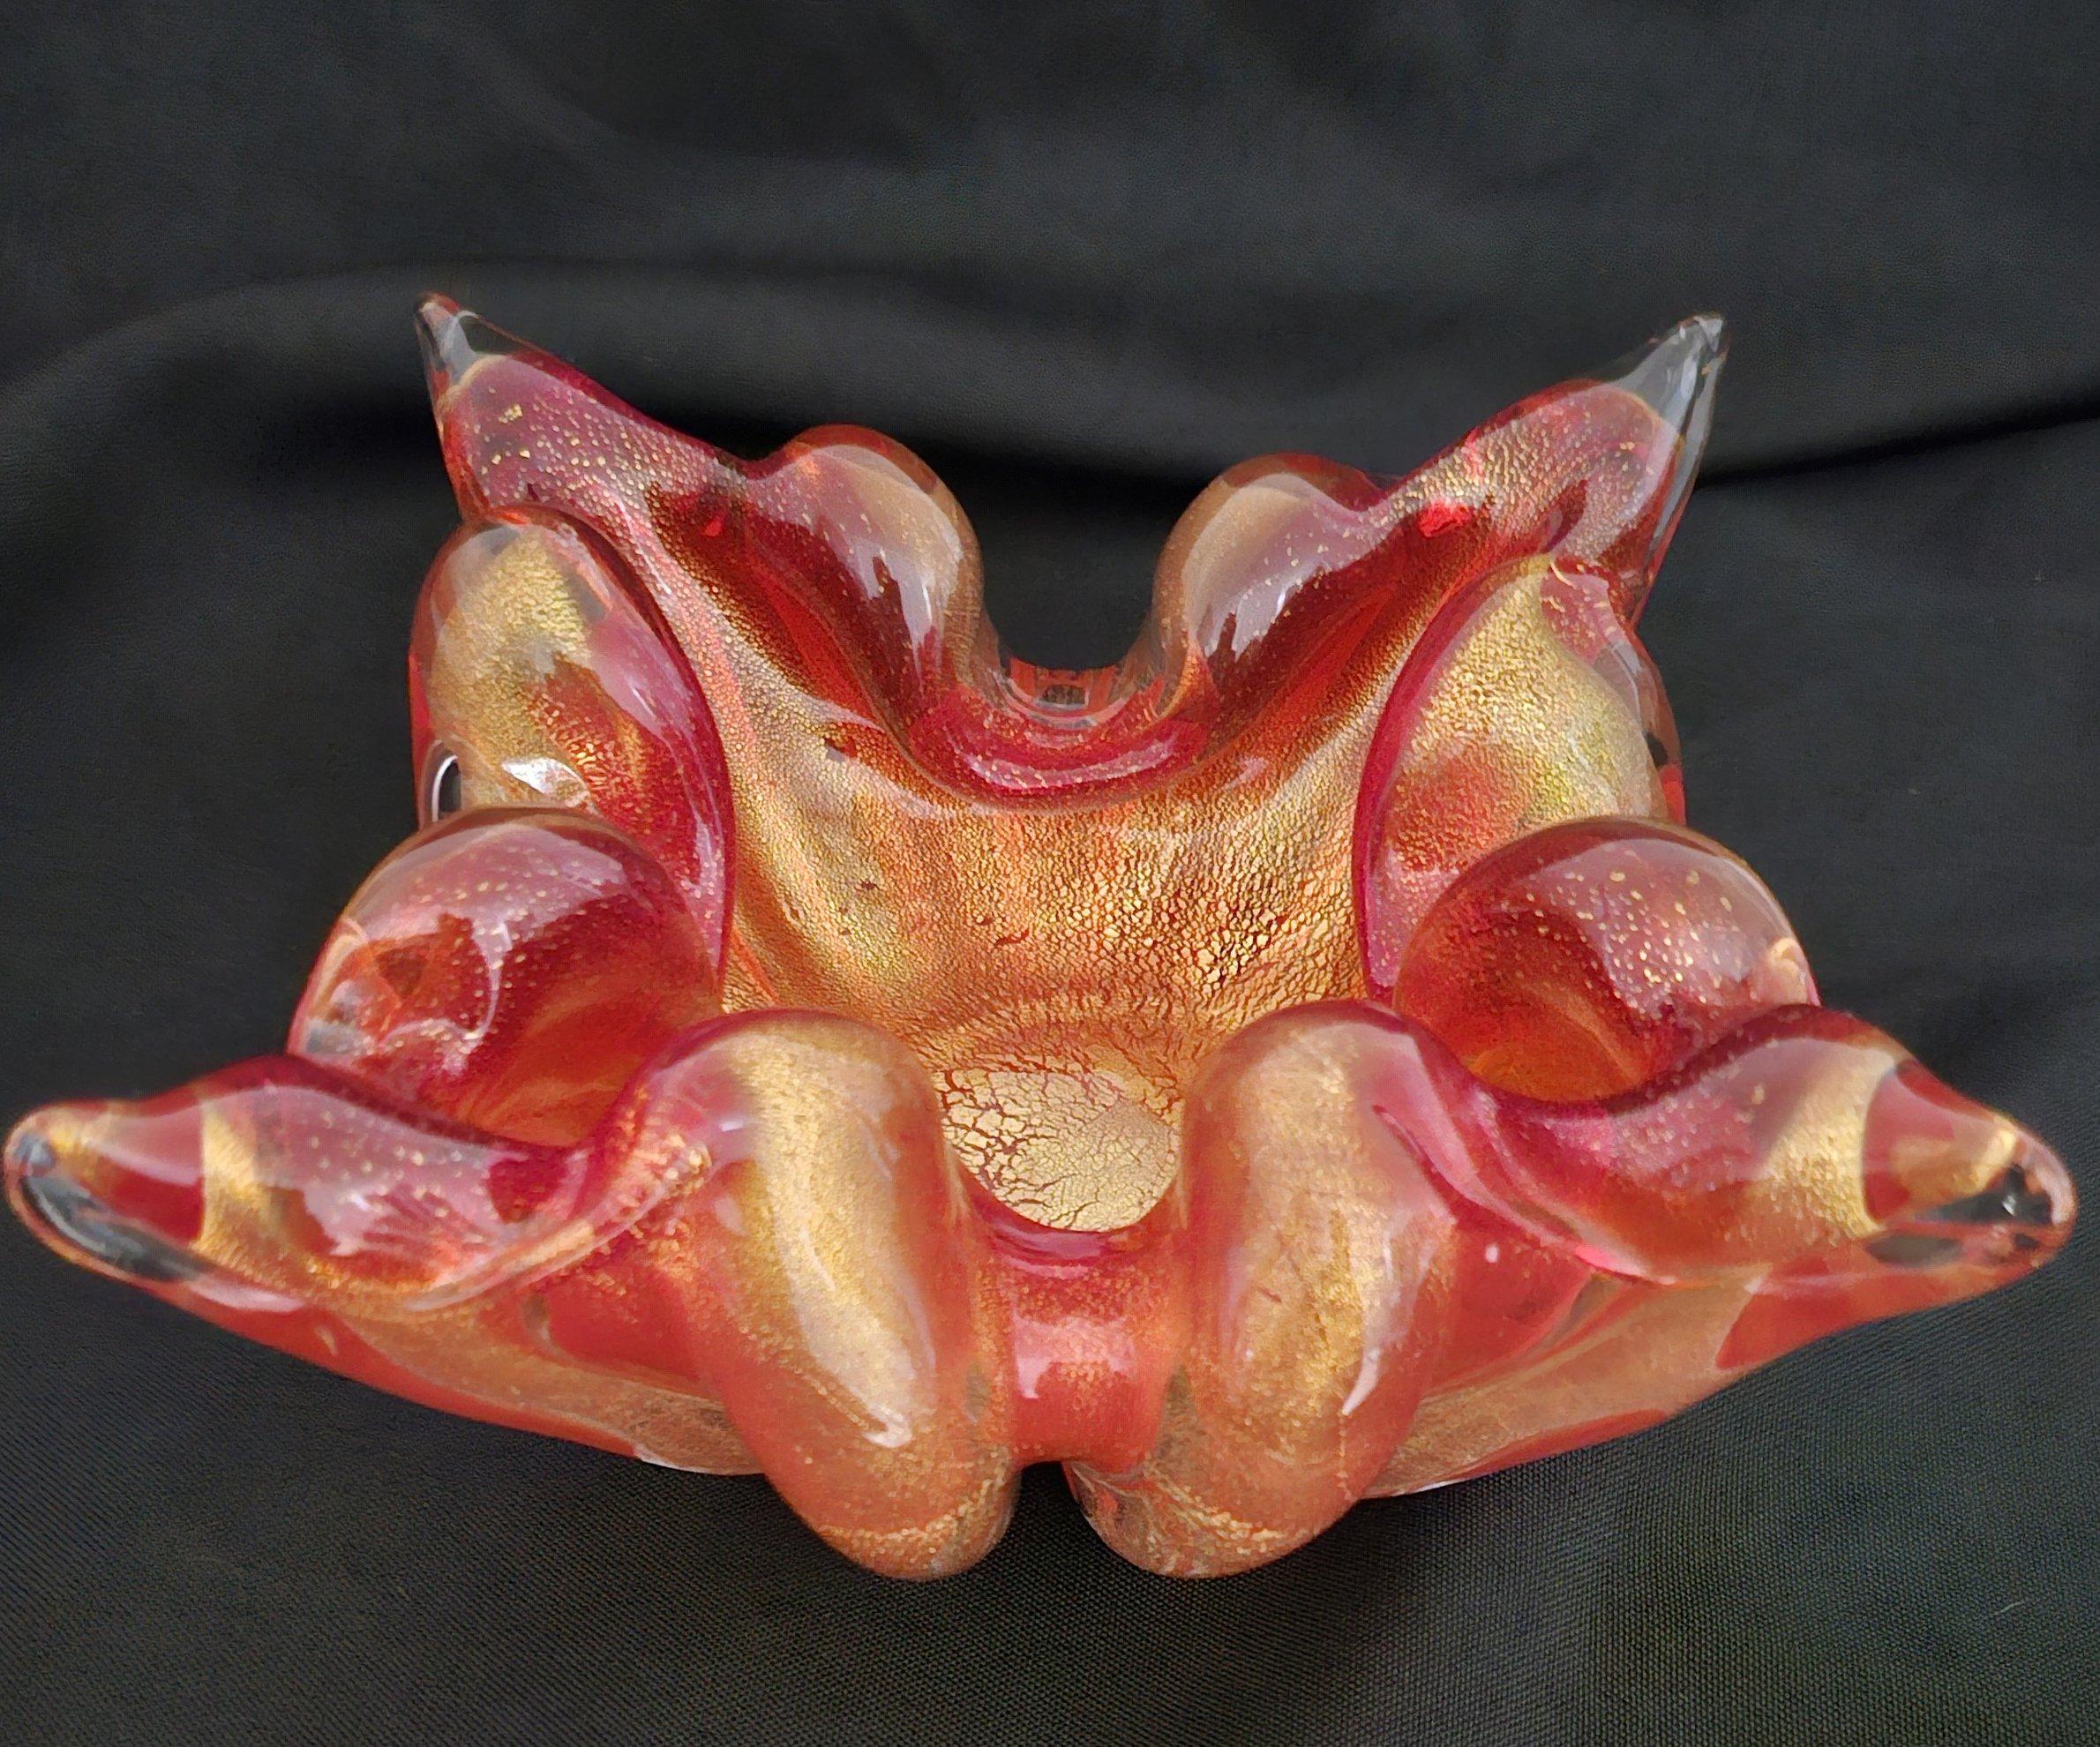 Mid-Century Modern Murano Glass Ashtray, Red w/Gold Polveri / Gold Leaf, Barovier & Toso (assumed) For Sale